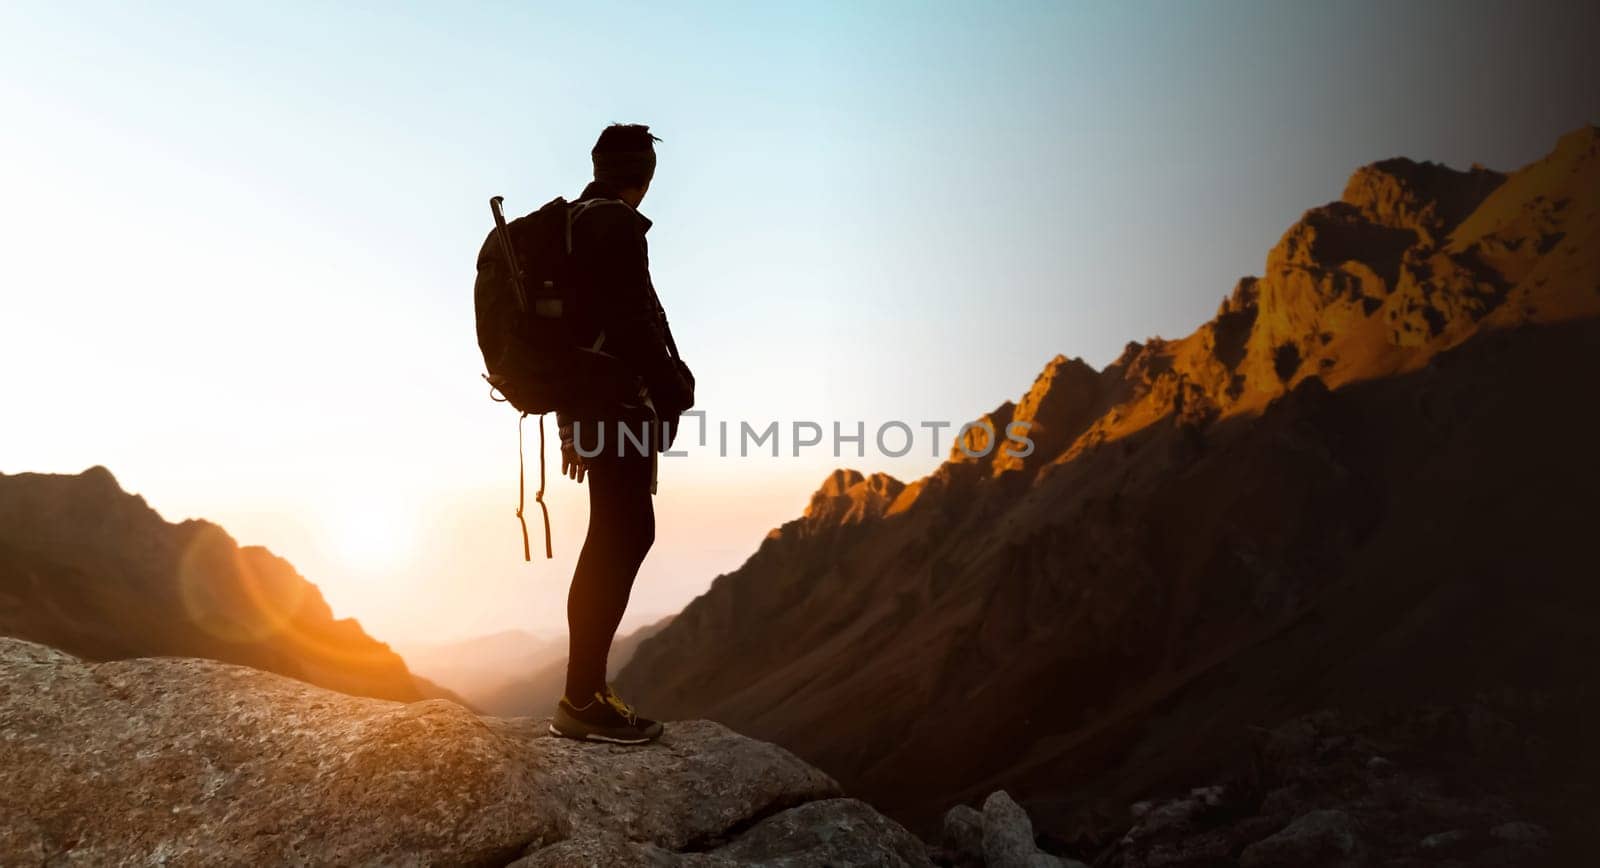 A young man travels, climbs trails among the high red mountains, the traveler is hiking and admiring the sunset in a picturesque place.